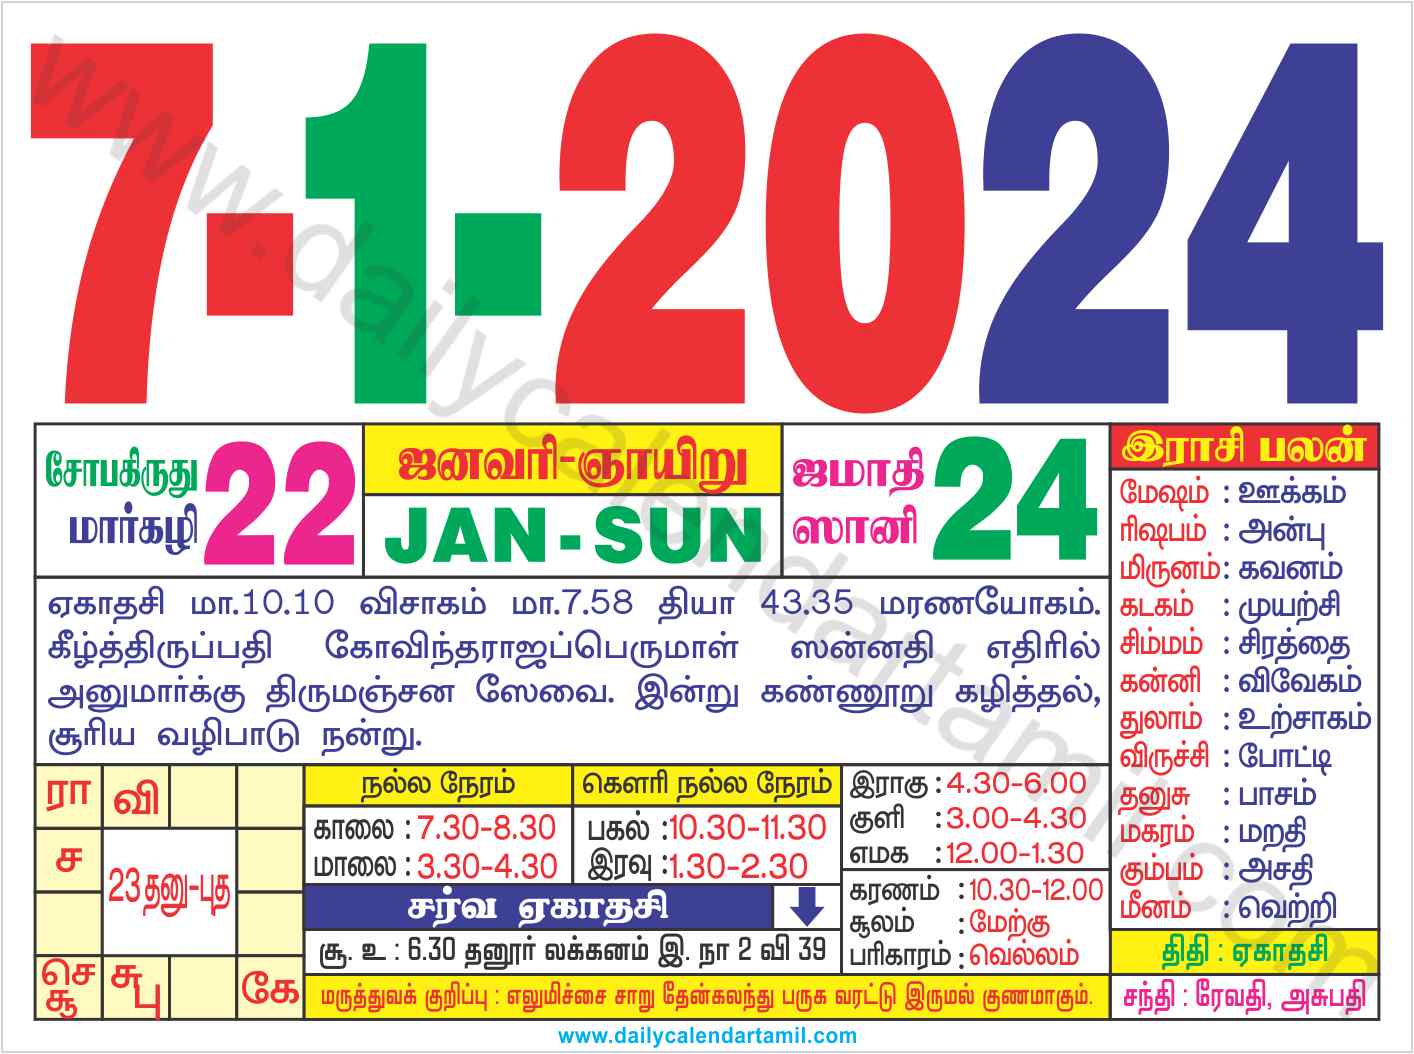 Tamil New Year 2022 Good Time In Malaysia